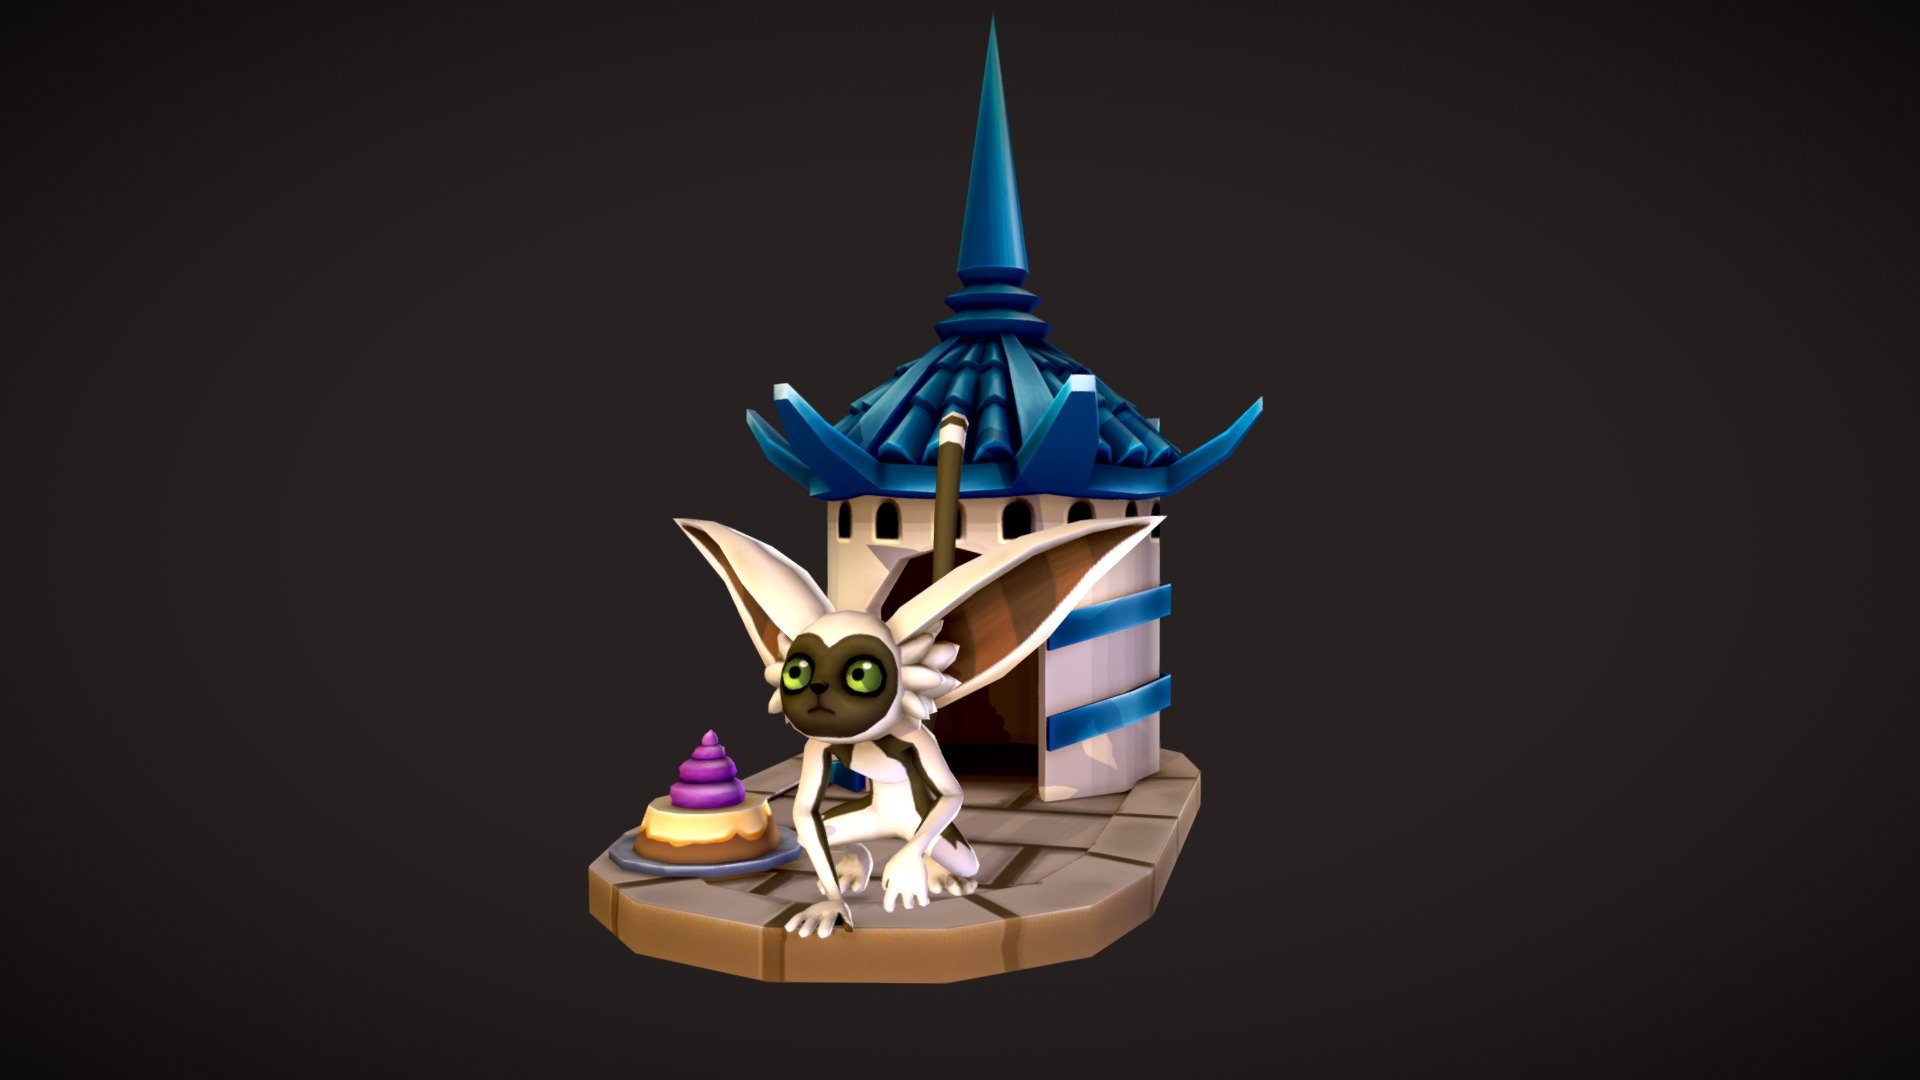 I had a lot of fun to model Momo the Lemur! A really fun project/collab of Shop Titans &amp; Avatar the last air bender. I was responsible for the modeling and the texture of the Momo, and his little hut!

All copyrights goes to Kabam &amp; Nickelodeon! - Momo the Lemur (Avatar) - 3D model by Kenny Ung (@KennyUng) 3d model